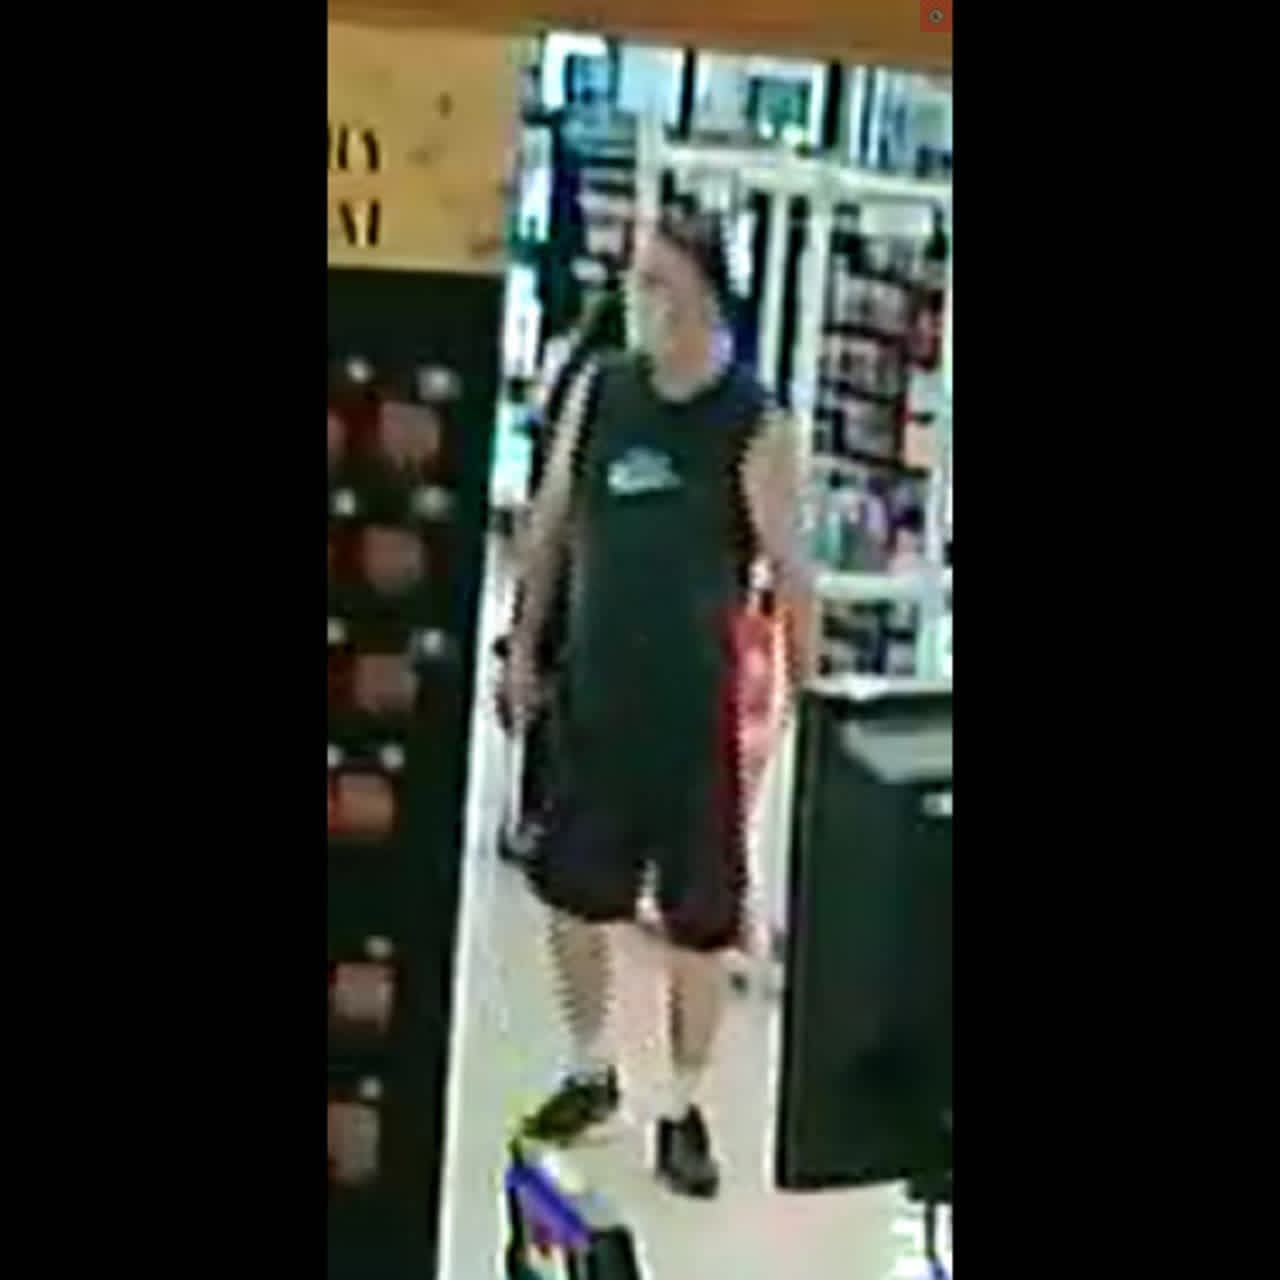 Police in Bucks County are seeking the public's help locating a man who they say assaulted a woman inside a supermarket in Perkasie Sunday afternoon.